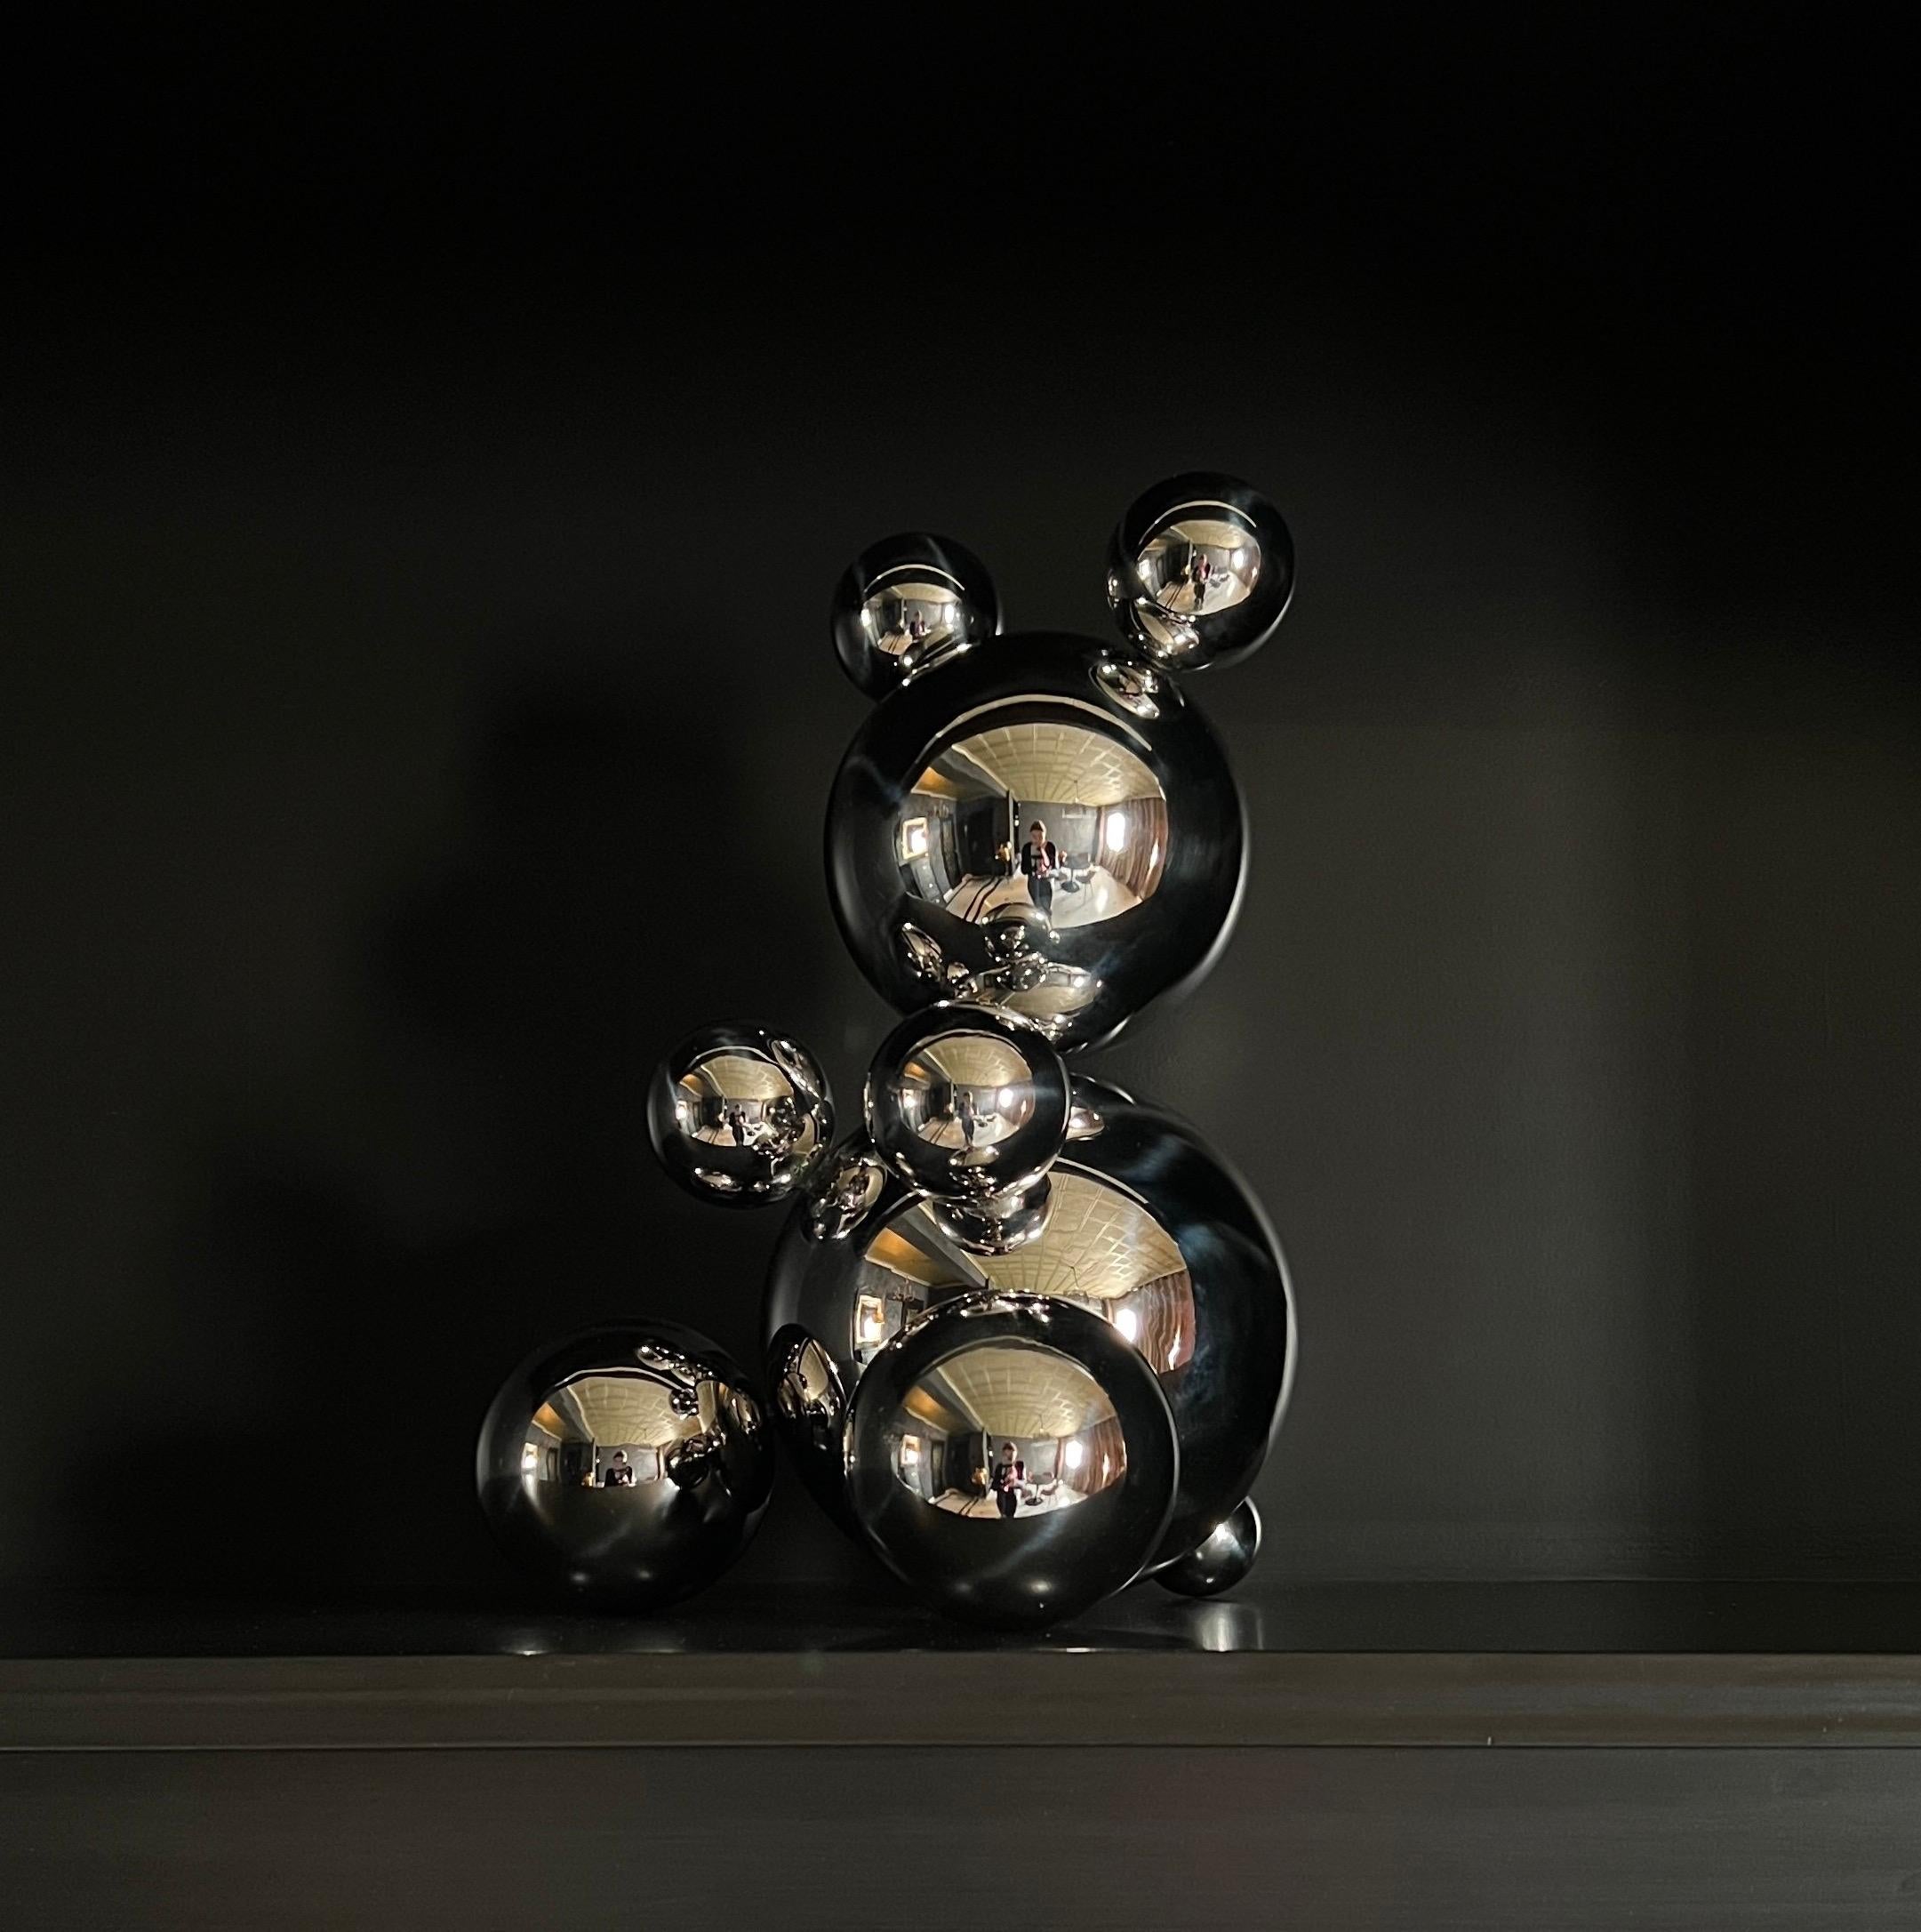 Middle Stainless Steel Bear 'Lucas' Sculpture Minimalistic Animal 5